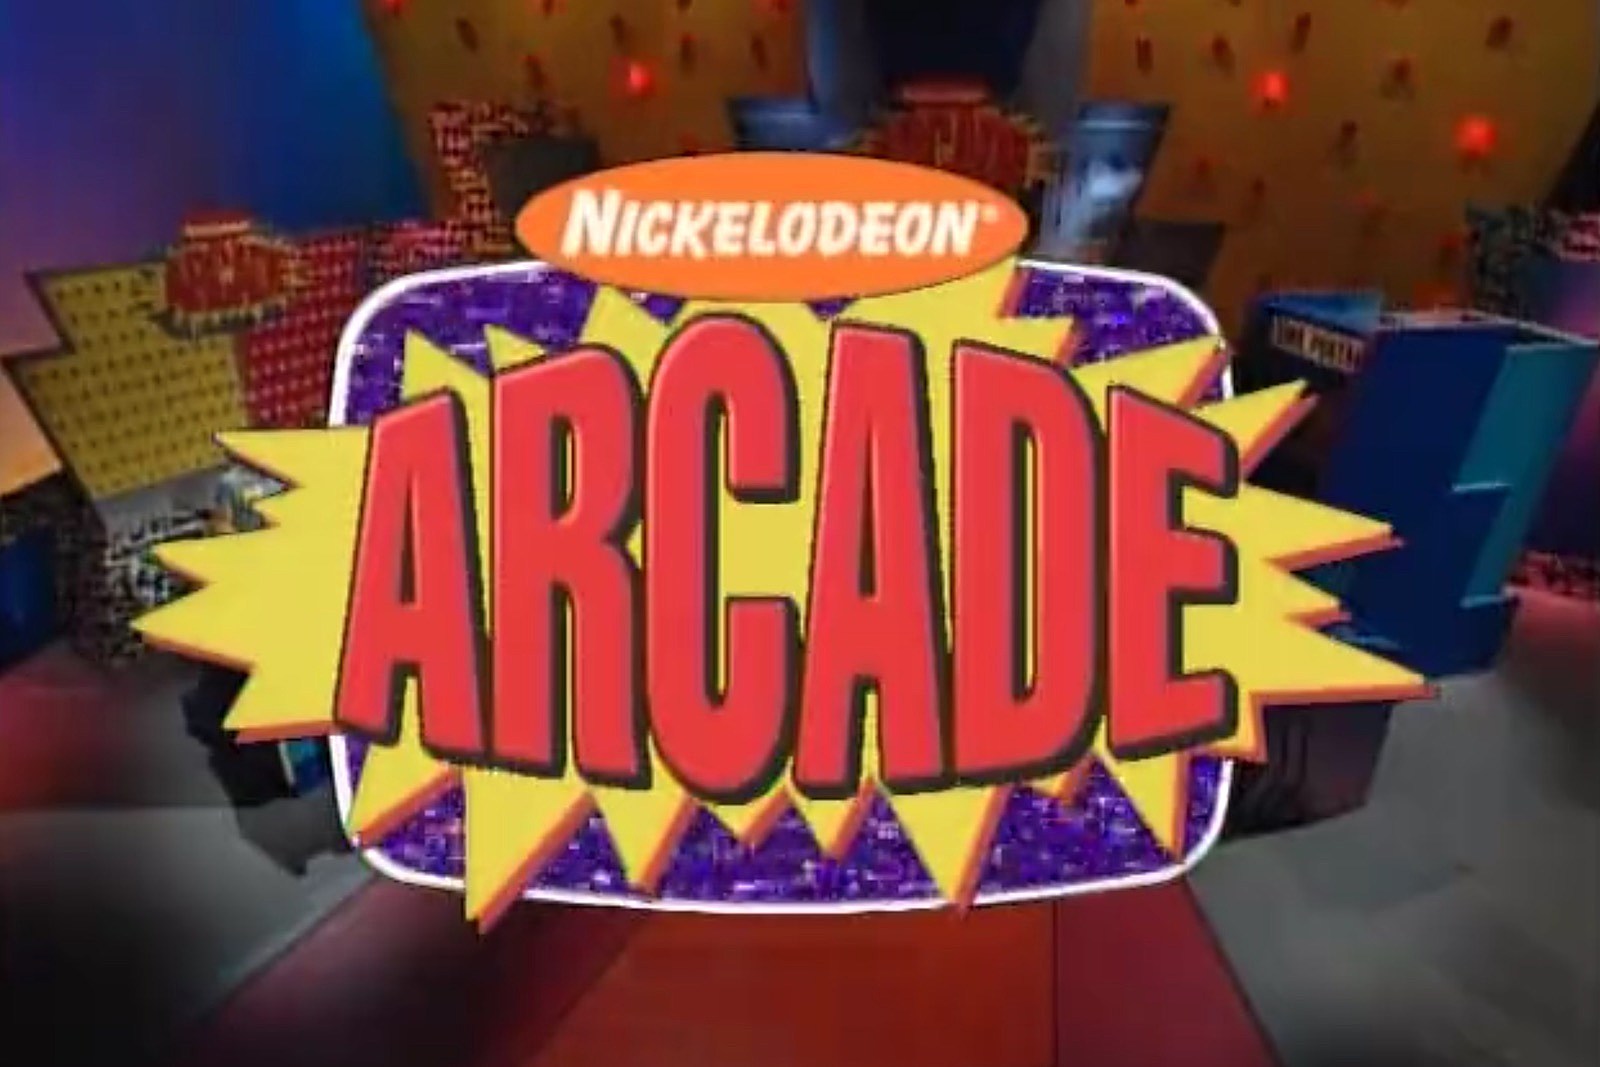 Nickelodeon Animation - Oh hey there. Just a friendly reminder that